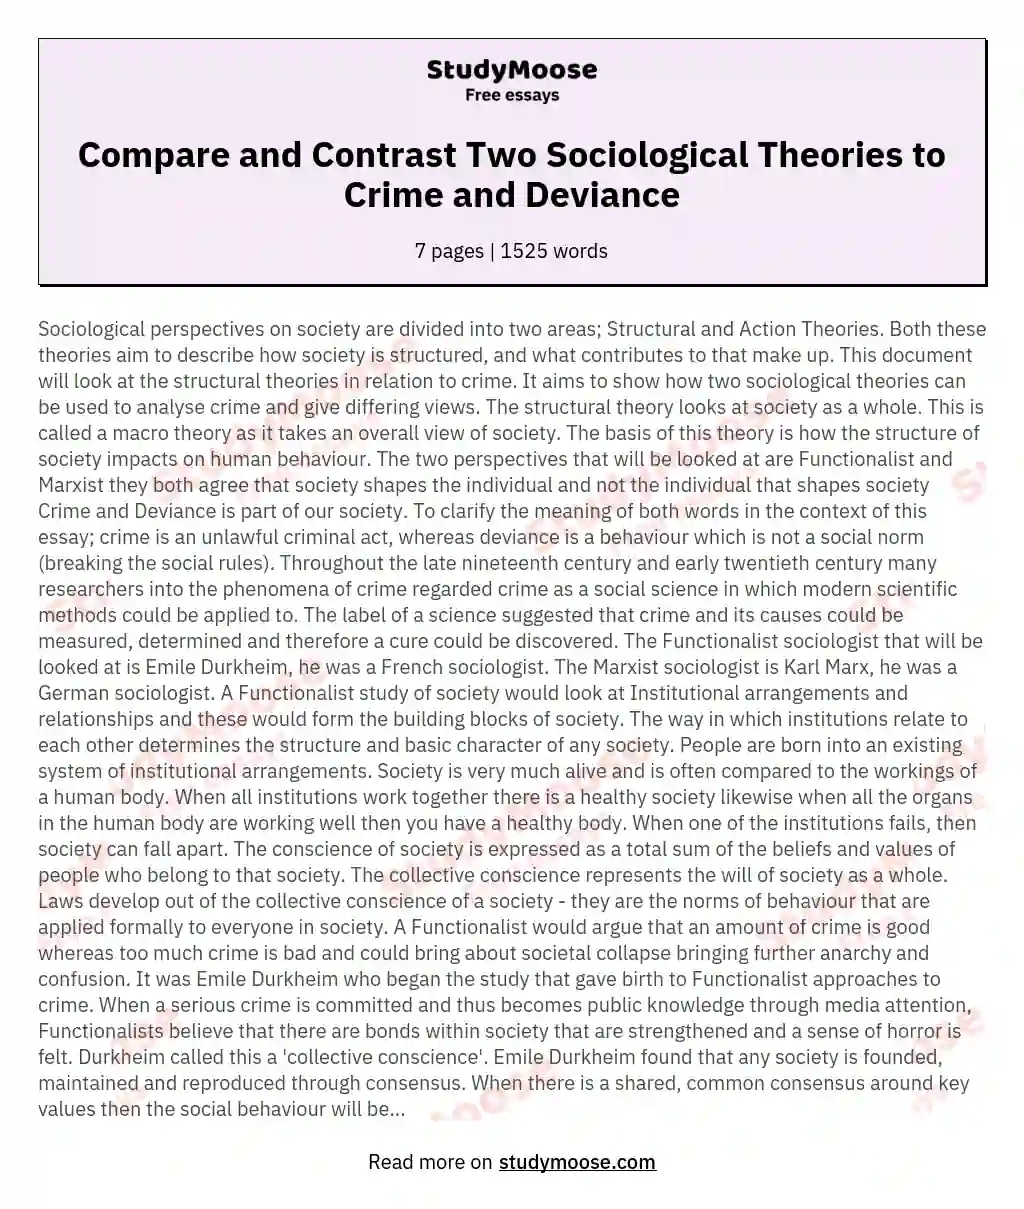 Compare and Contrast Two Sociological Theories to Crime and Deviance